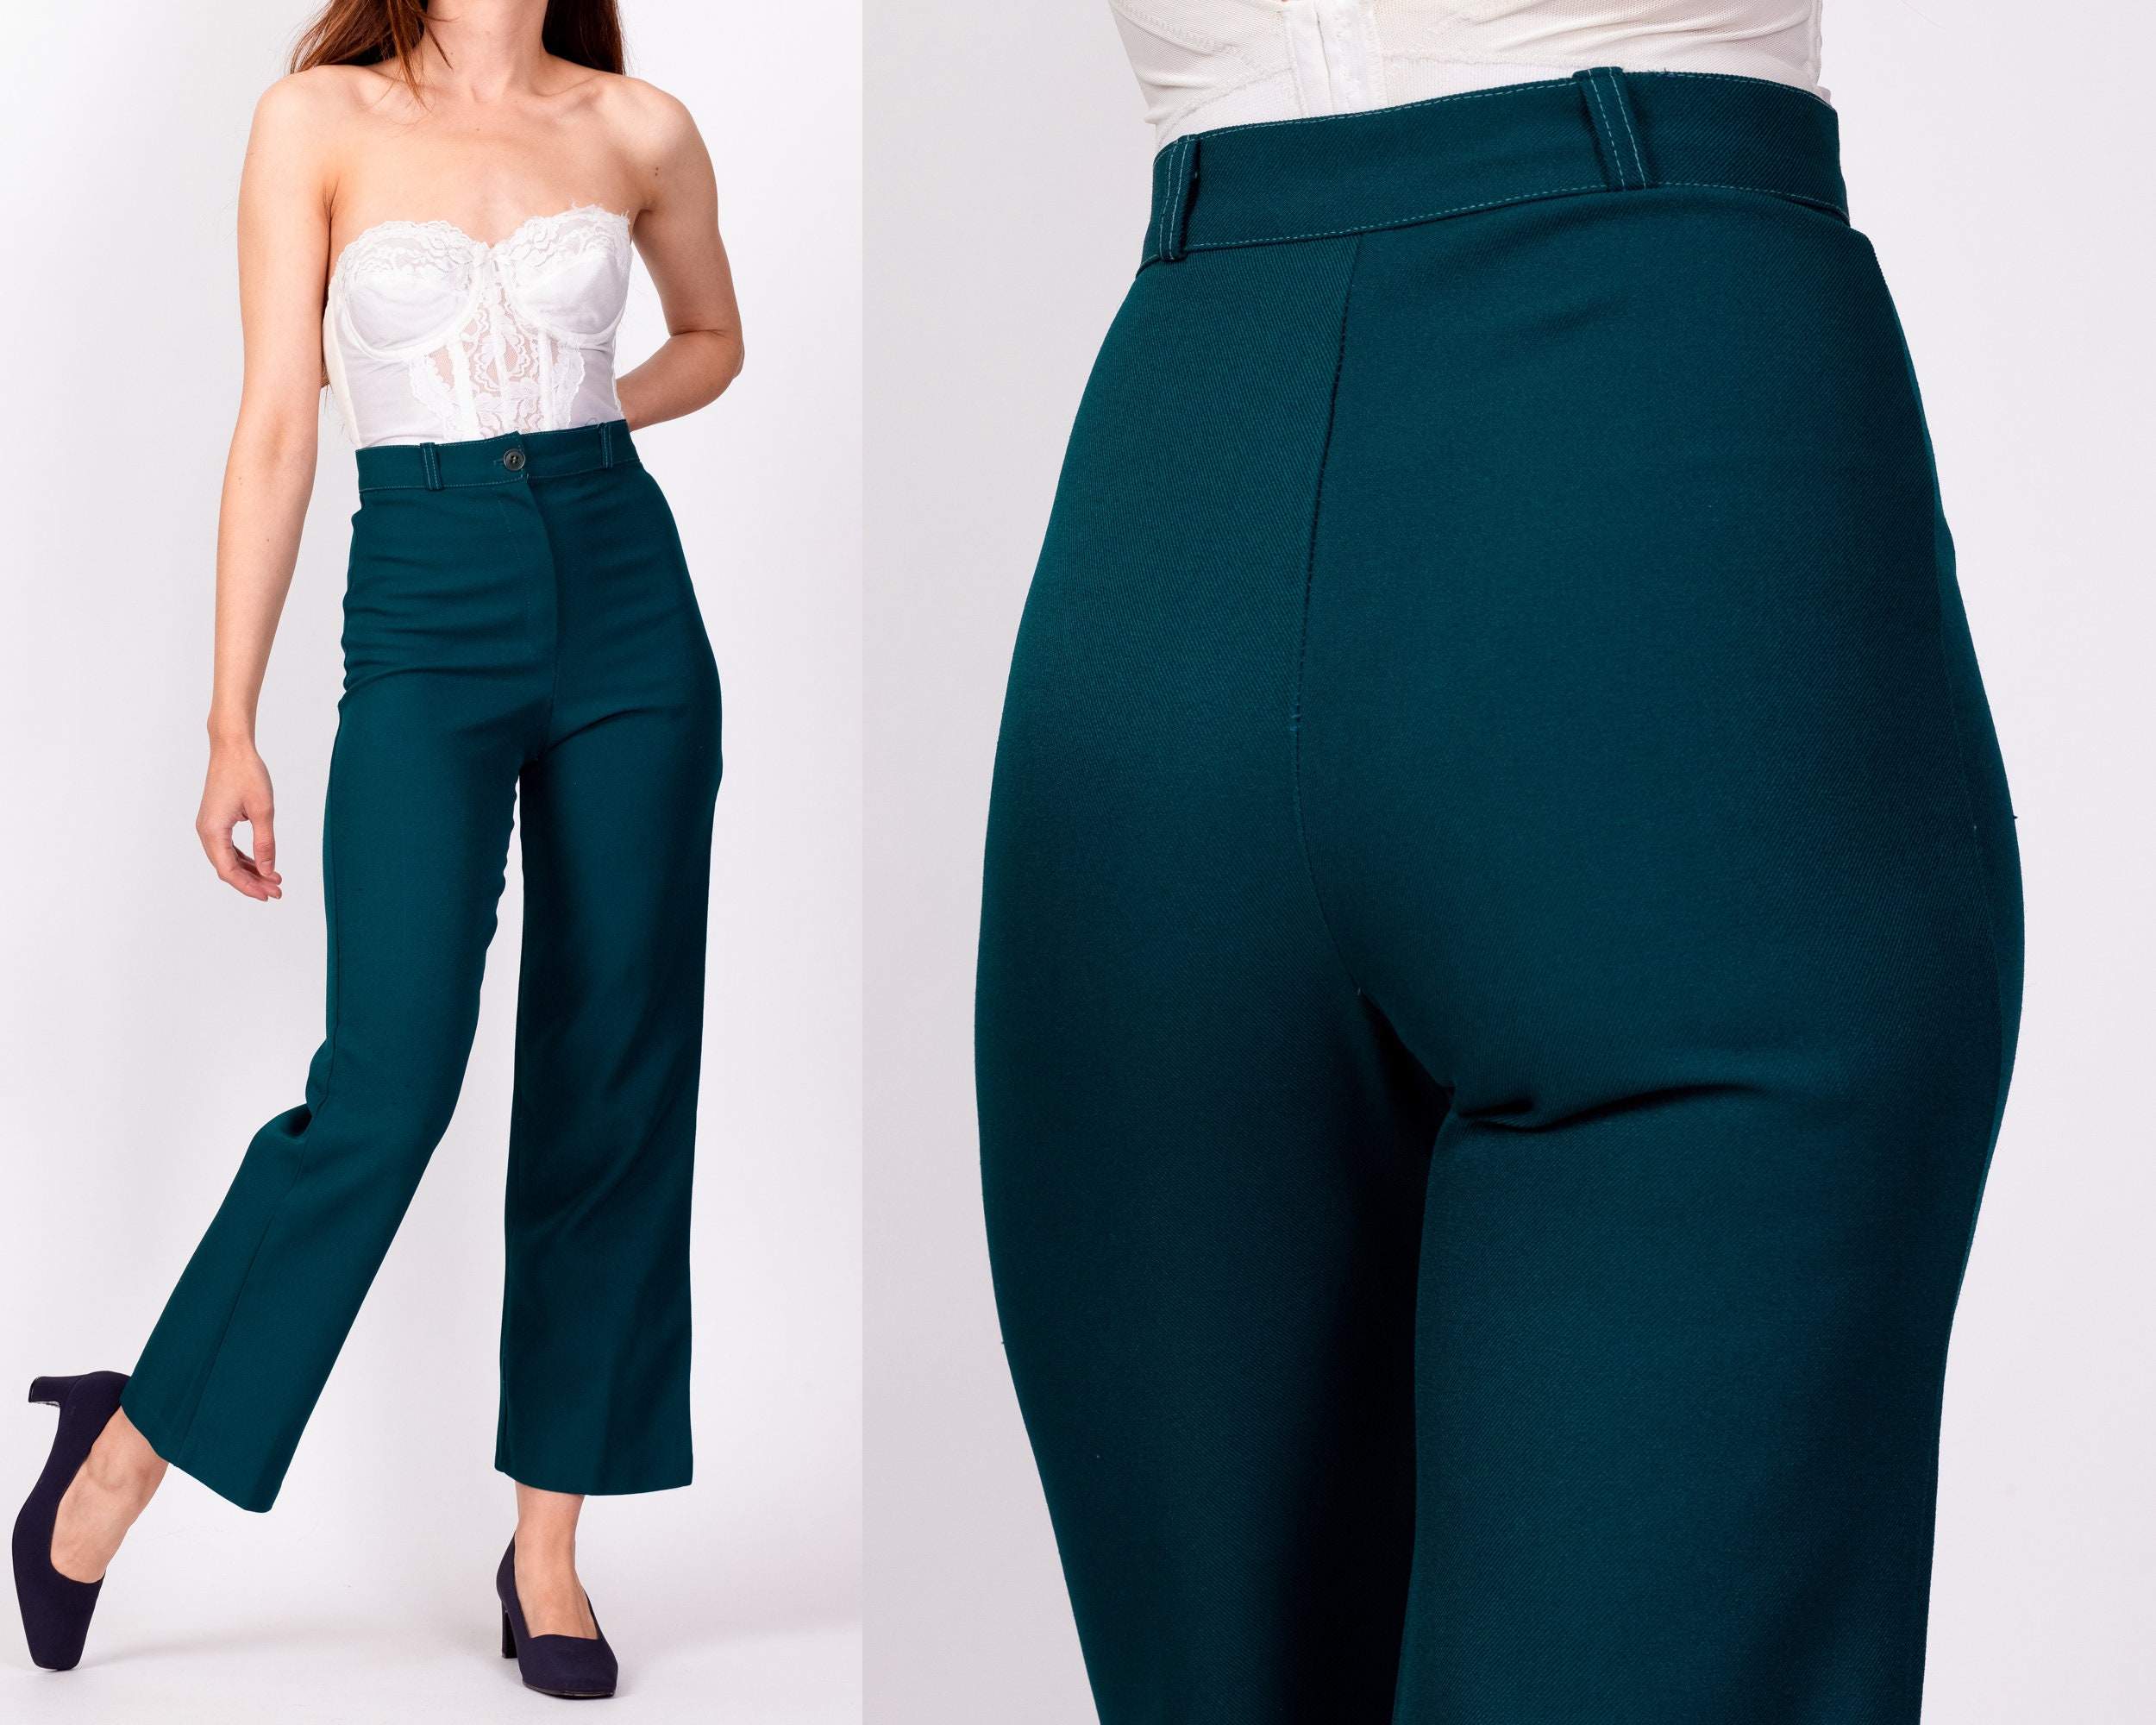 Slip-On Elasticated Polyester Blend Casual Women's Dark Green Trouser Pants  With Pockets (38